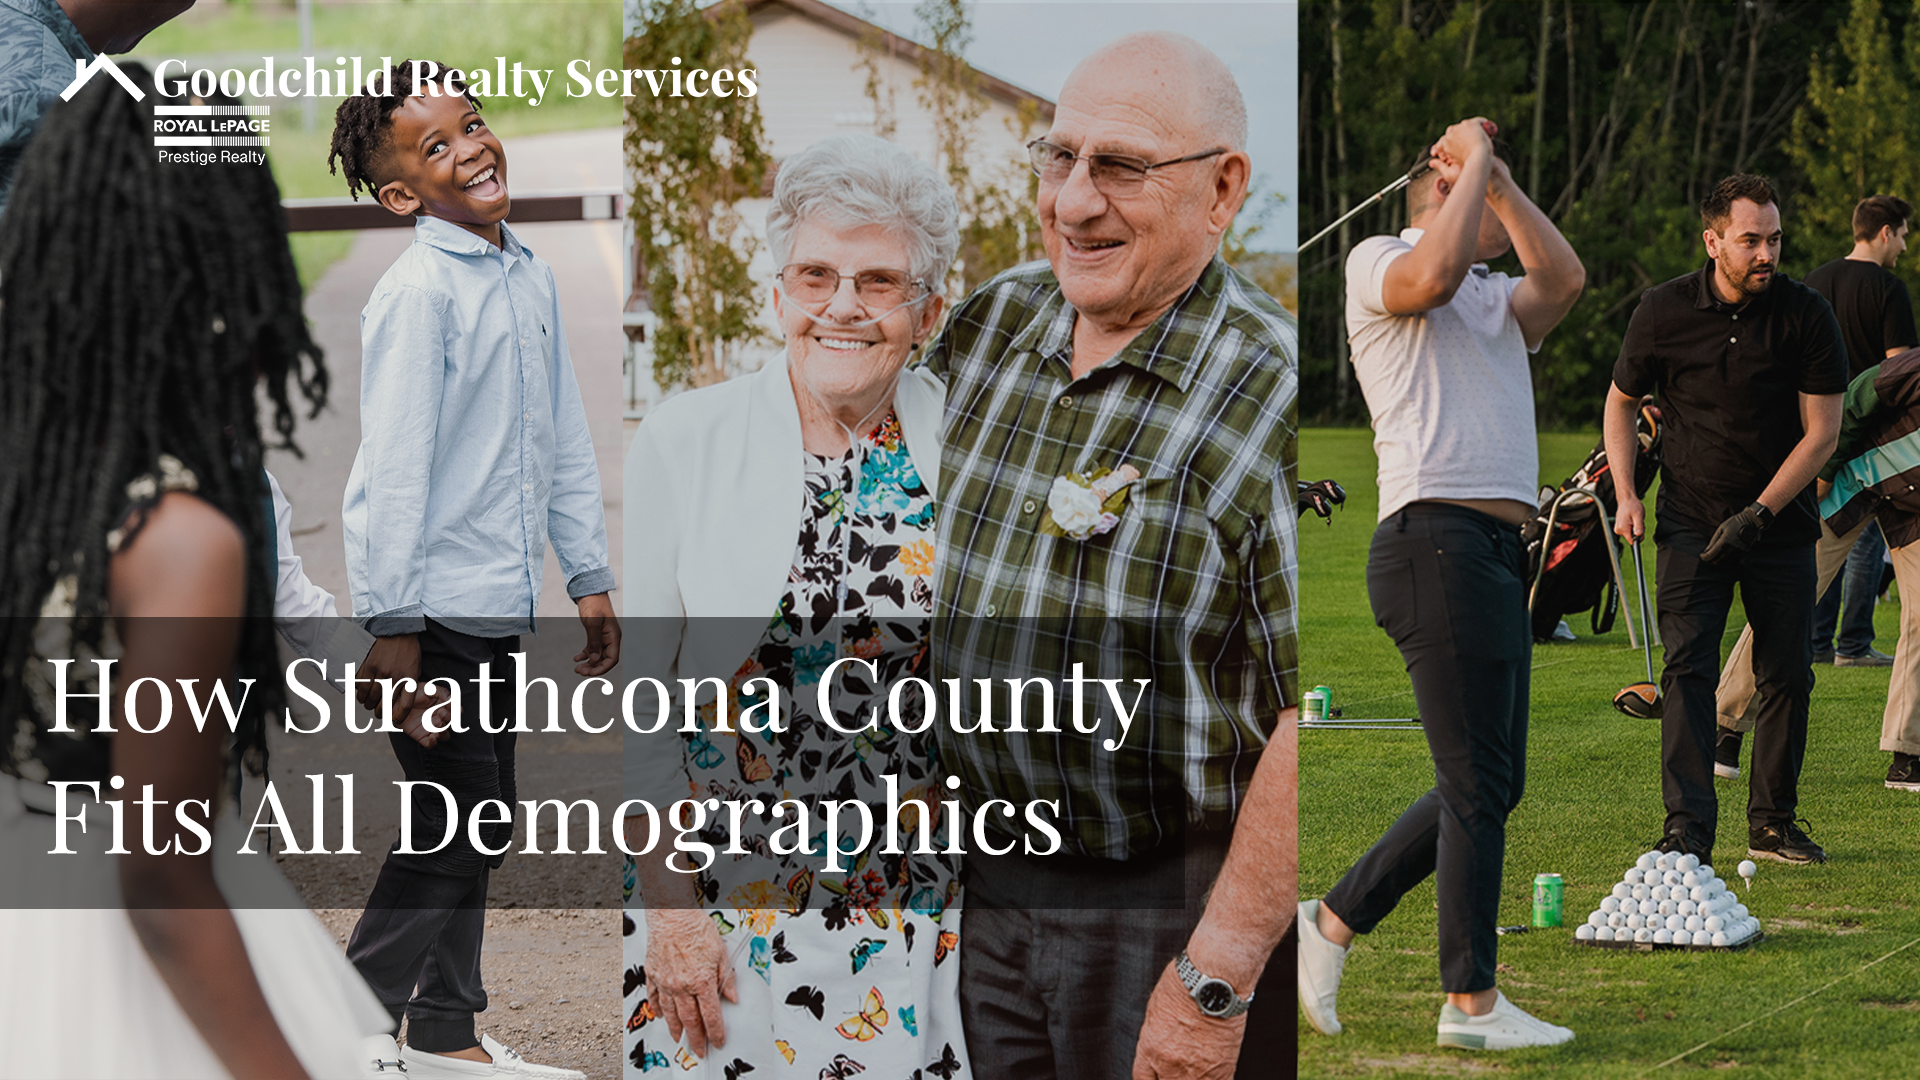 How Strathcona County Fits All Demographics